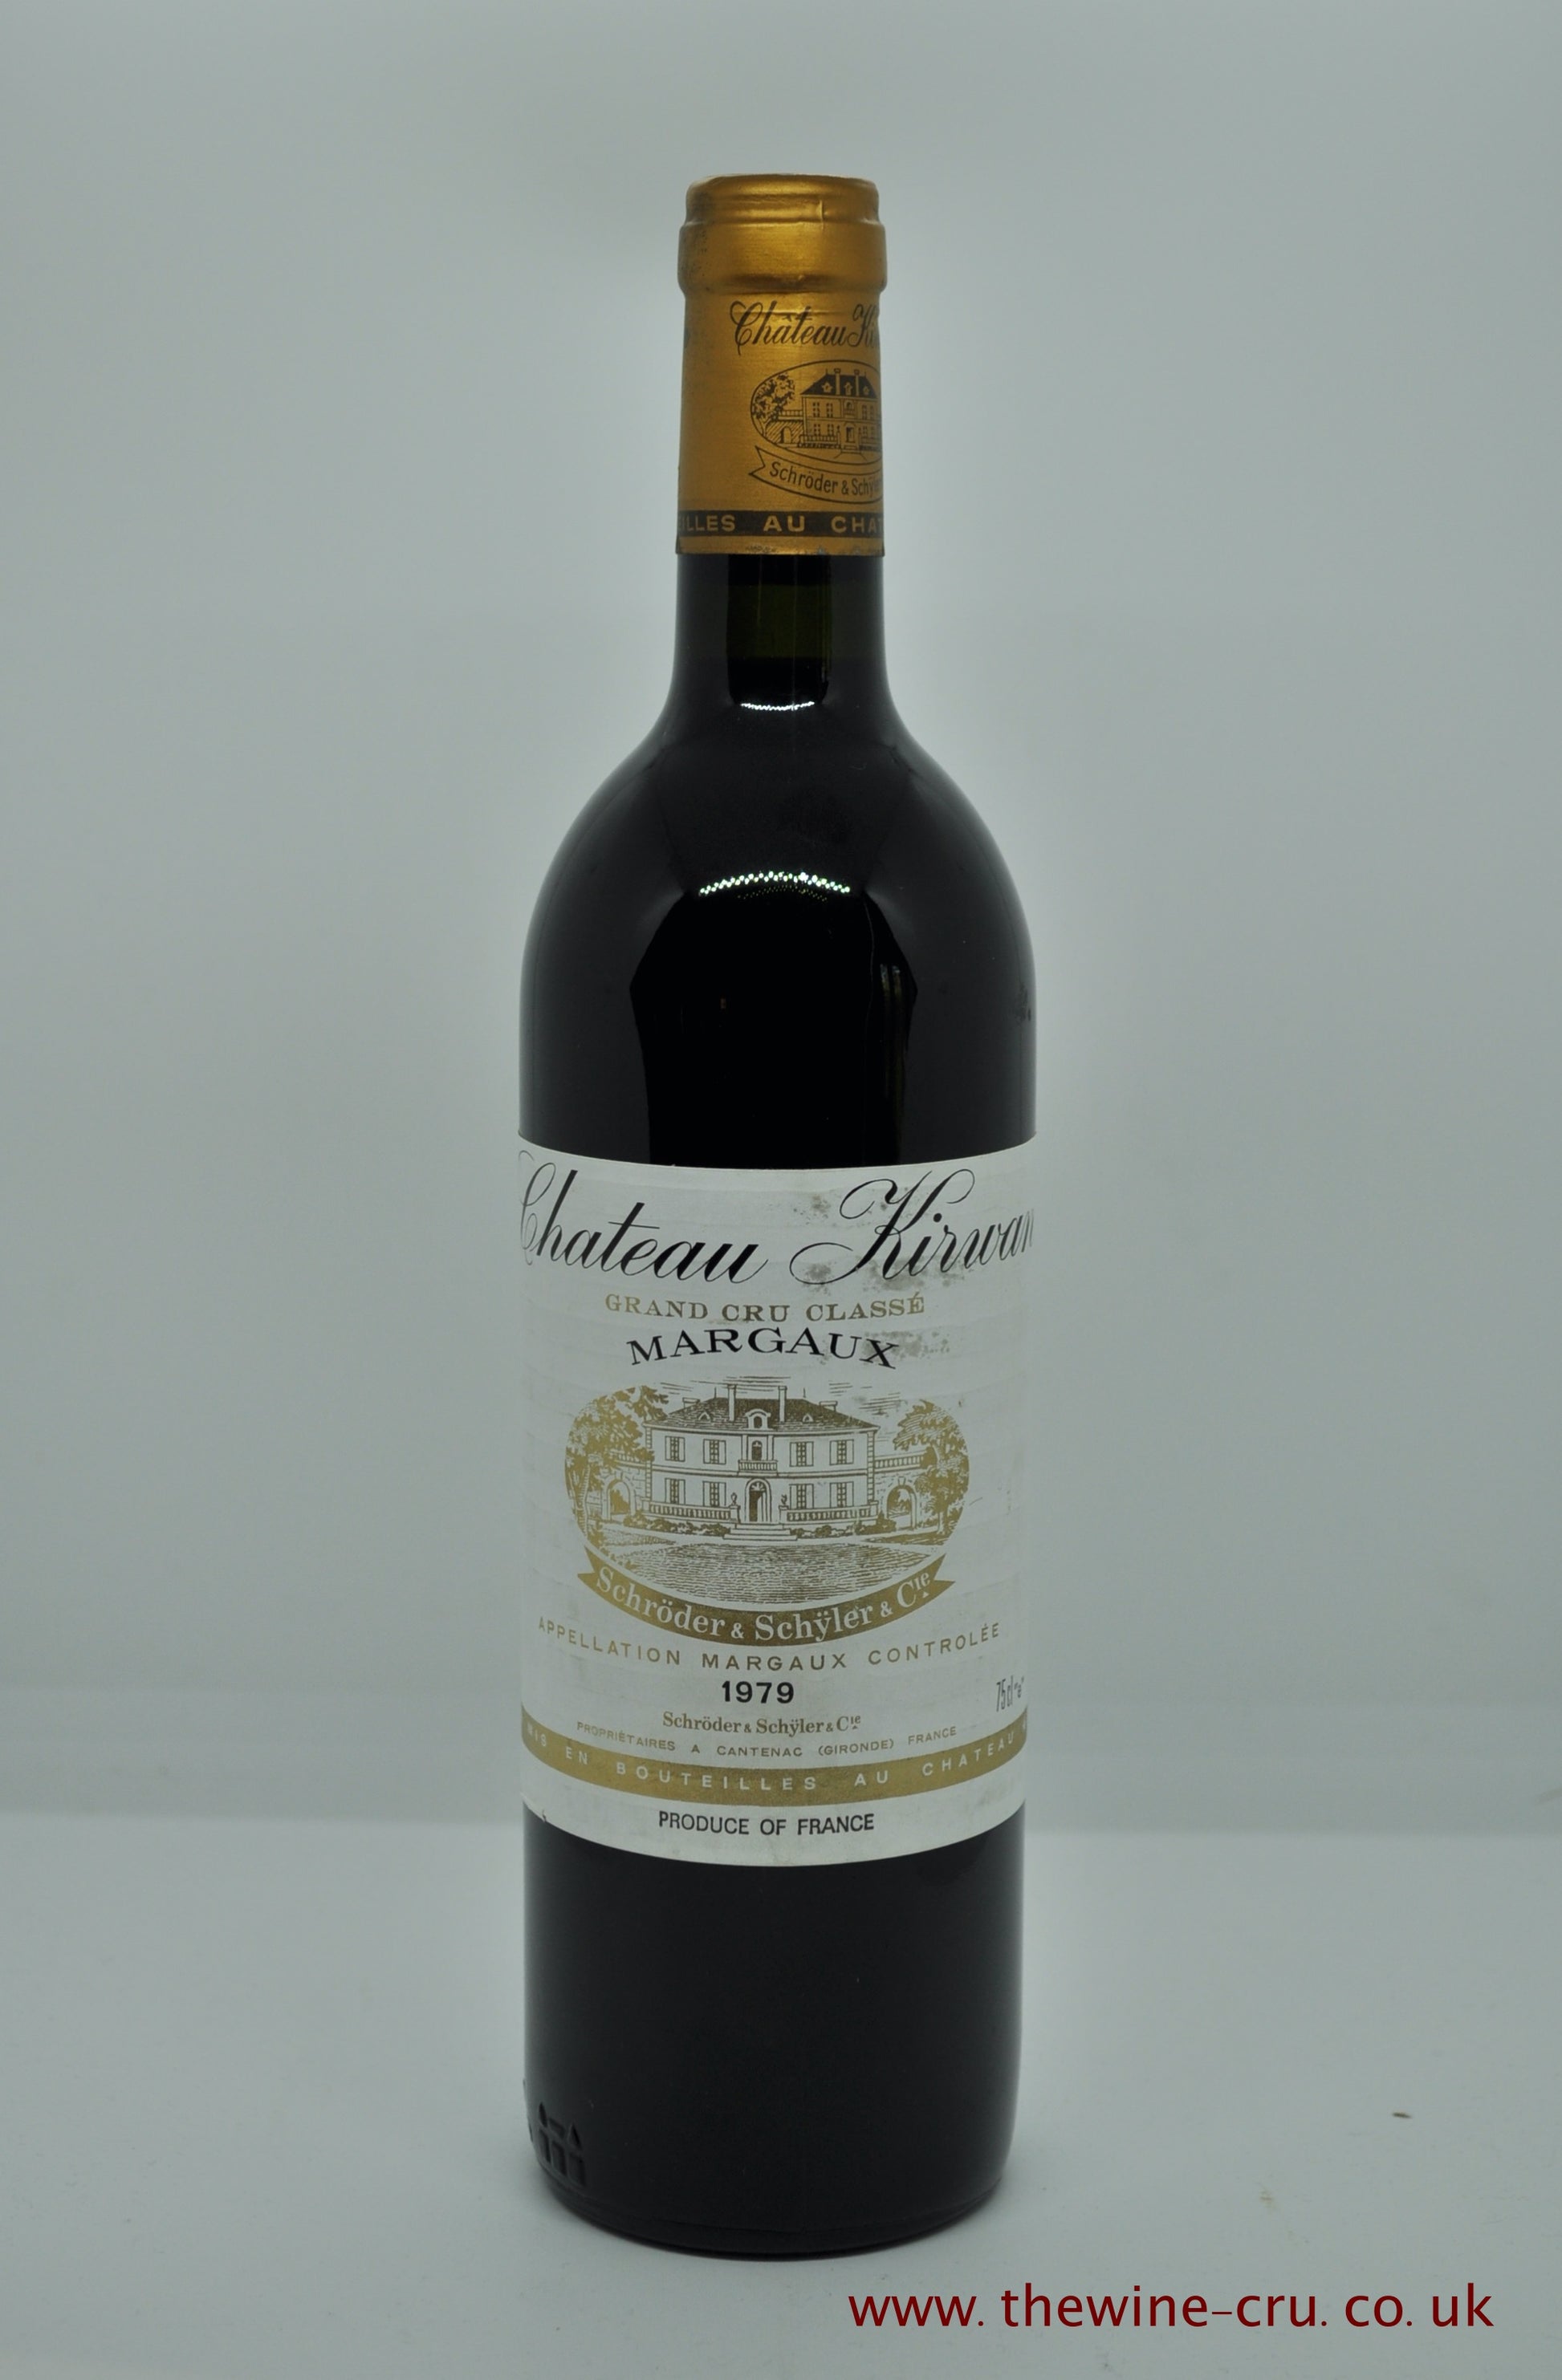 A bottle of 1979 vintage red wine from Chateau Kirwan in Margaux, France. The bottle is in good condition with wine level into neck. Immediate delivery. Free local delivery. Gift wrapping available.